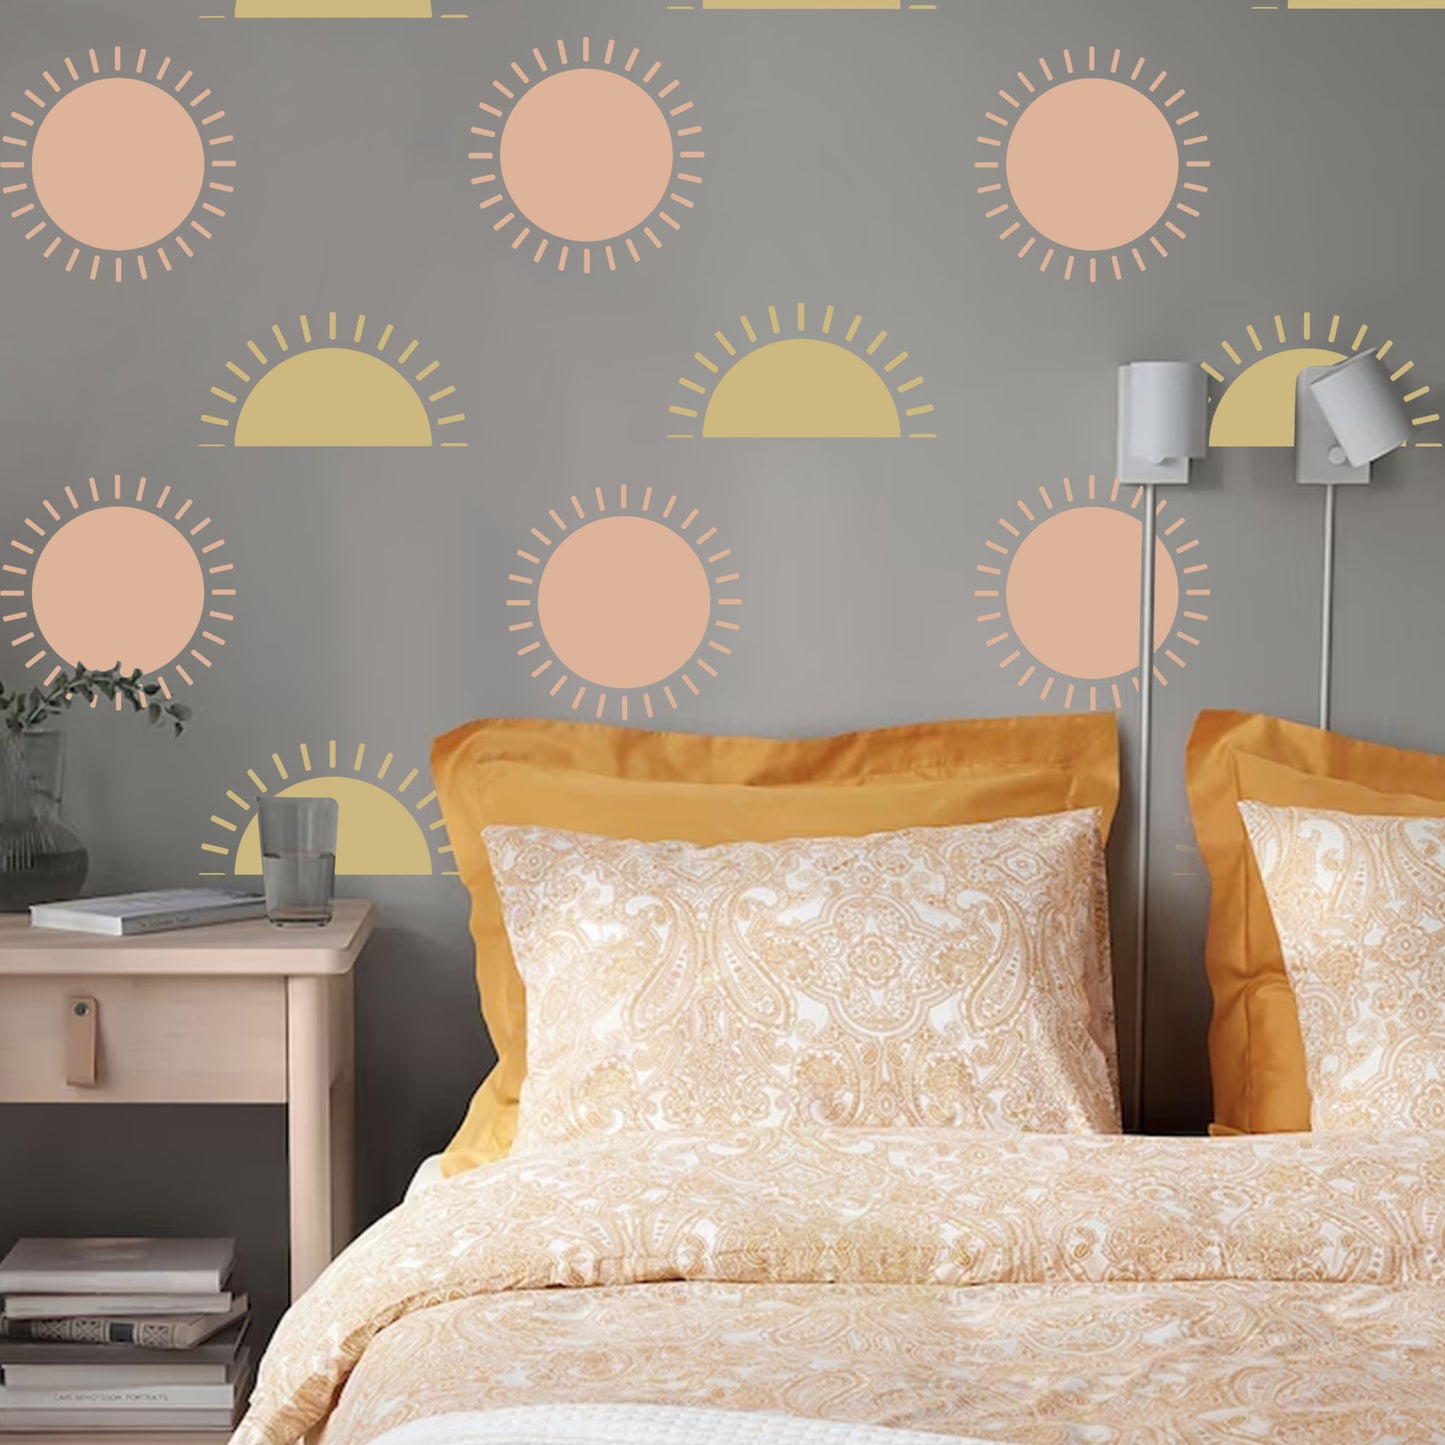 Kayra Decor Rising Sun Design Stencil for Wall Painting (KDMD1424-1624)